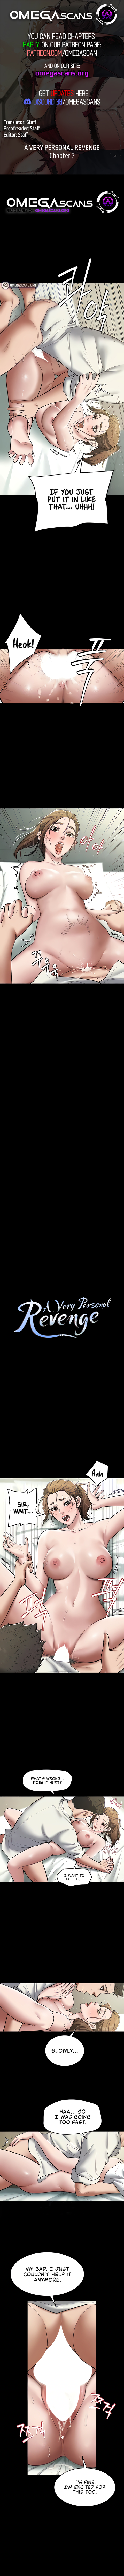 A Very Private Revenge NEW image